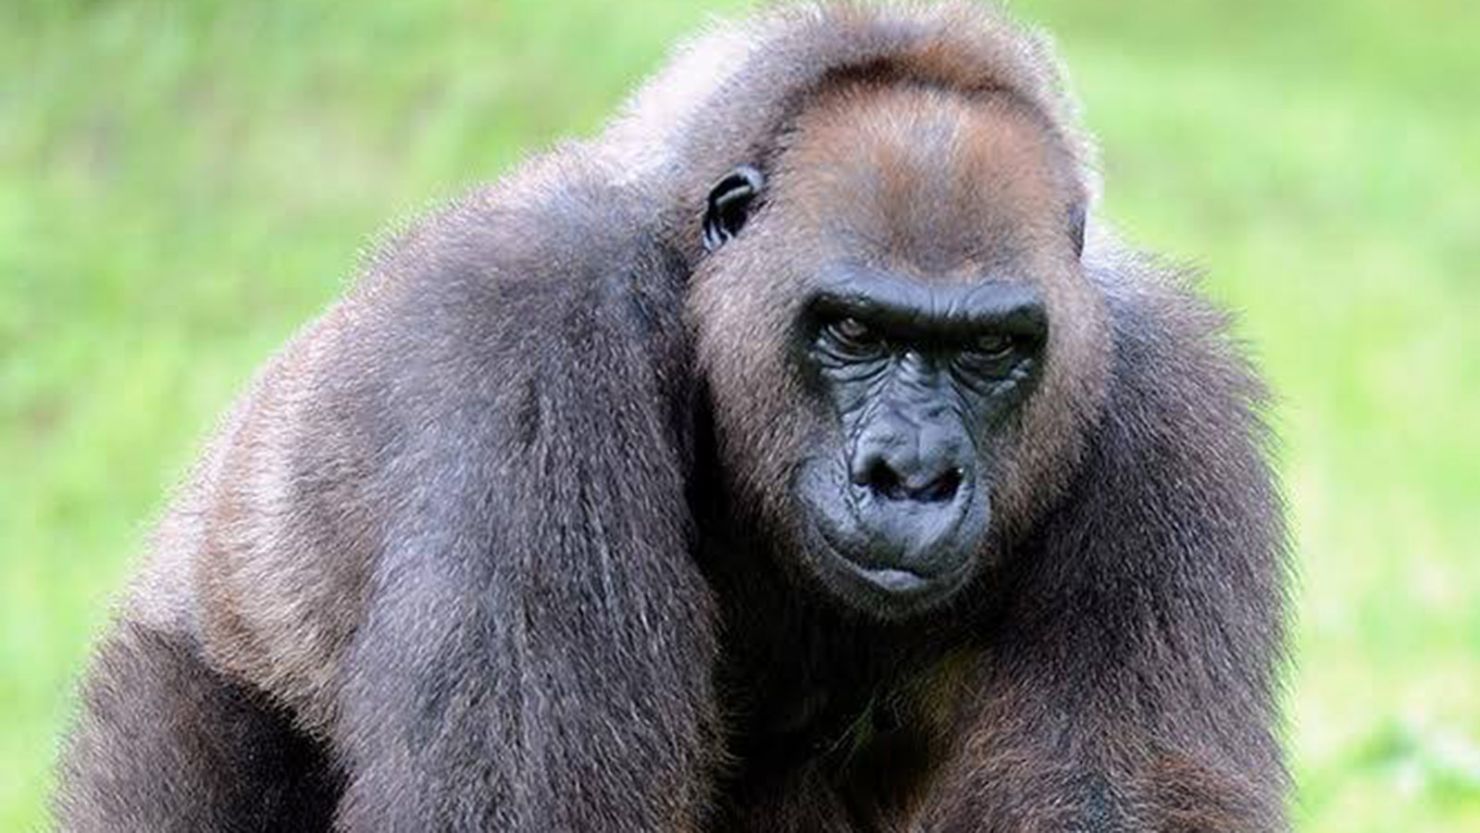 Josephine, grandmother of Harambe, has died at 49, Miami zoo officials say.